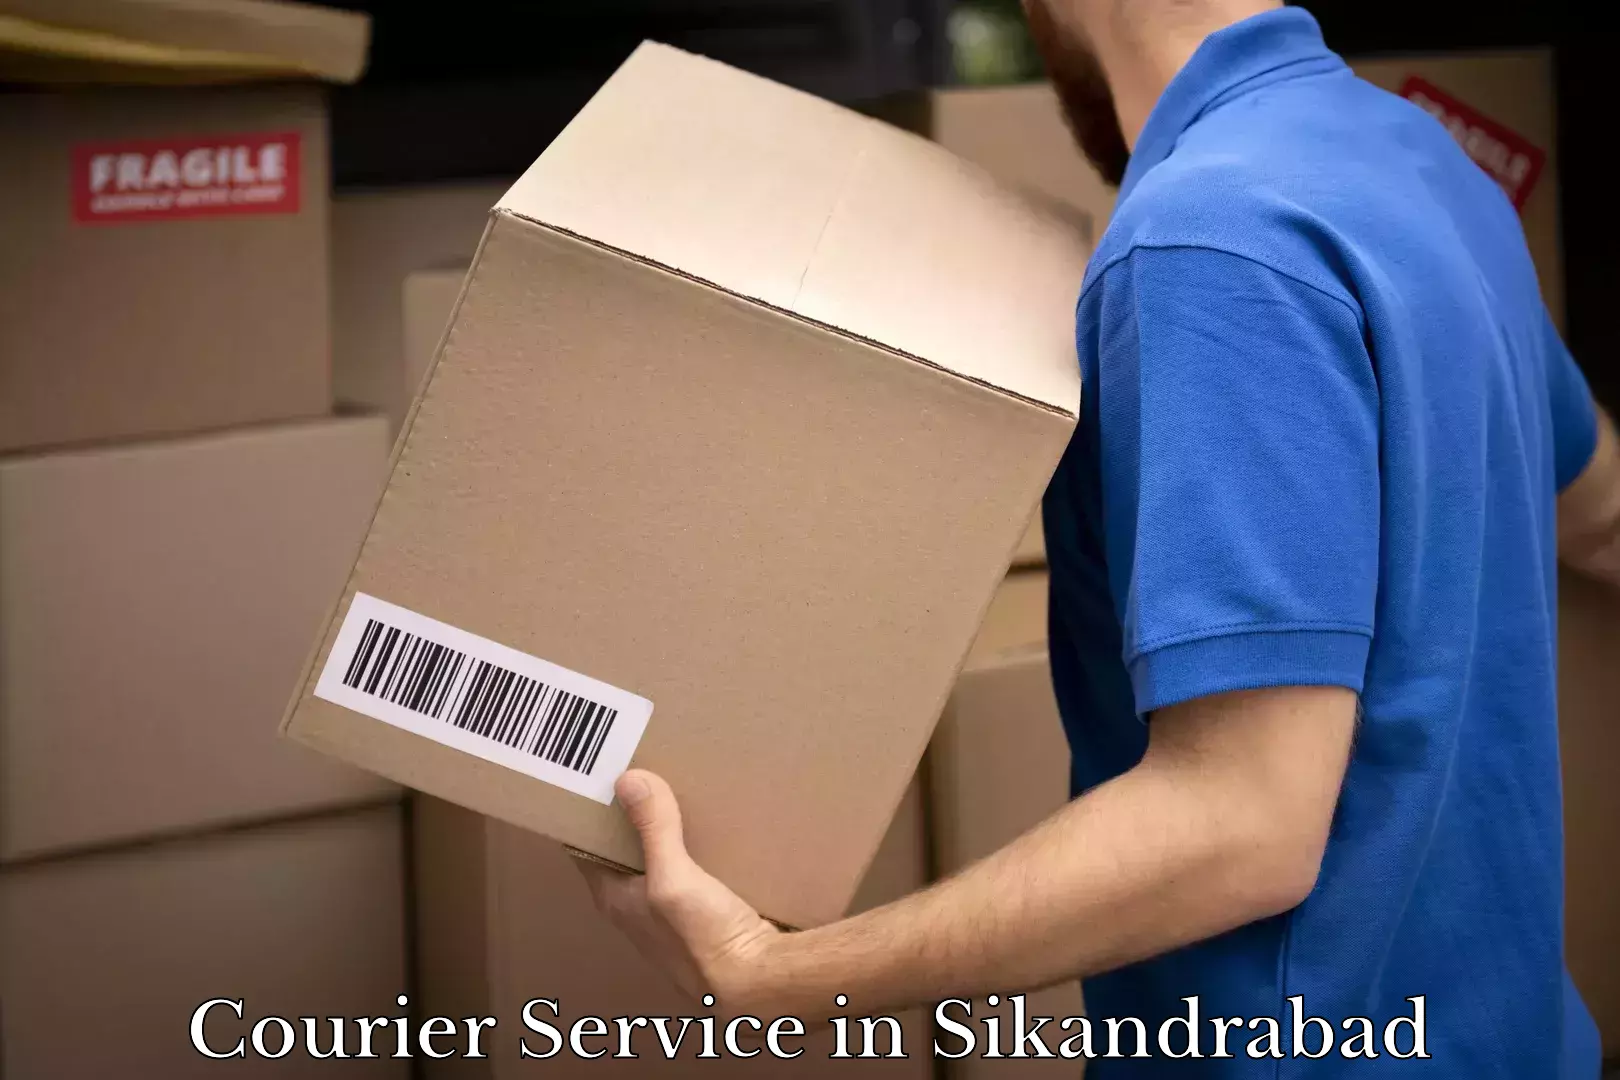 Courier service efficiency in Sikandrabad